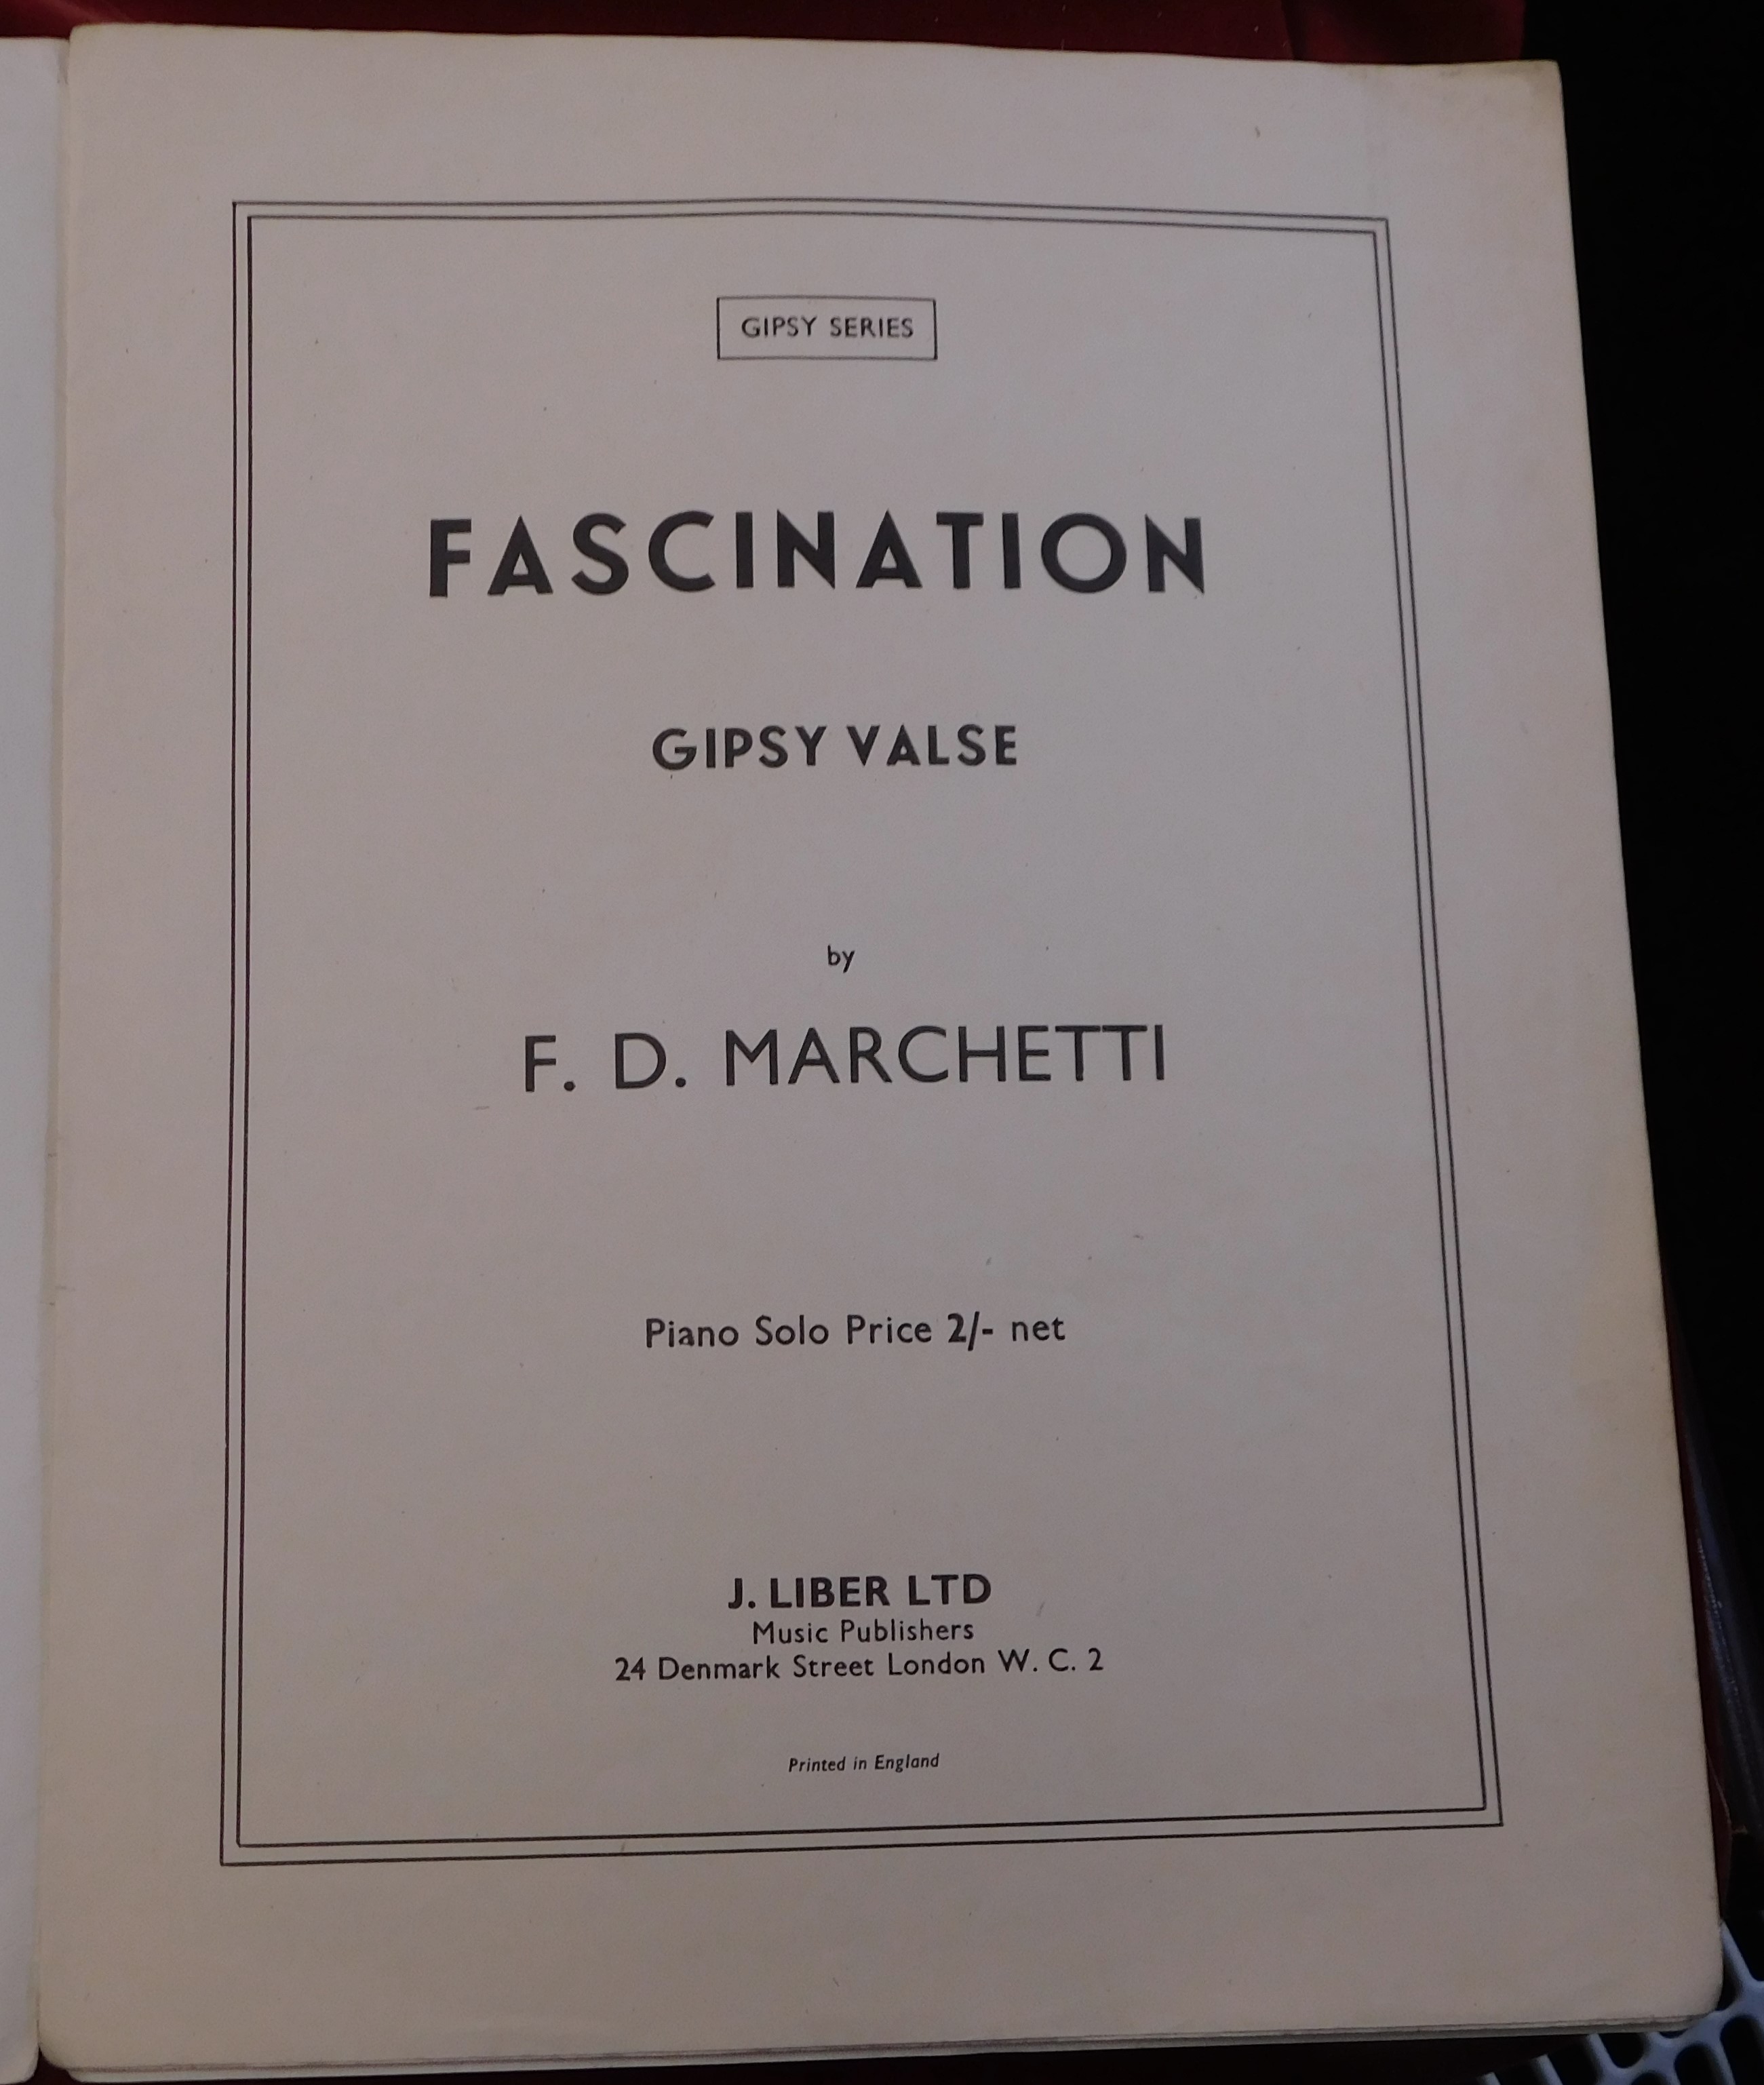 Fascination A Gipsy Valse by F D Marchetti 1904 Premier band on cover and stamped inside very good - Image 3 of 3